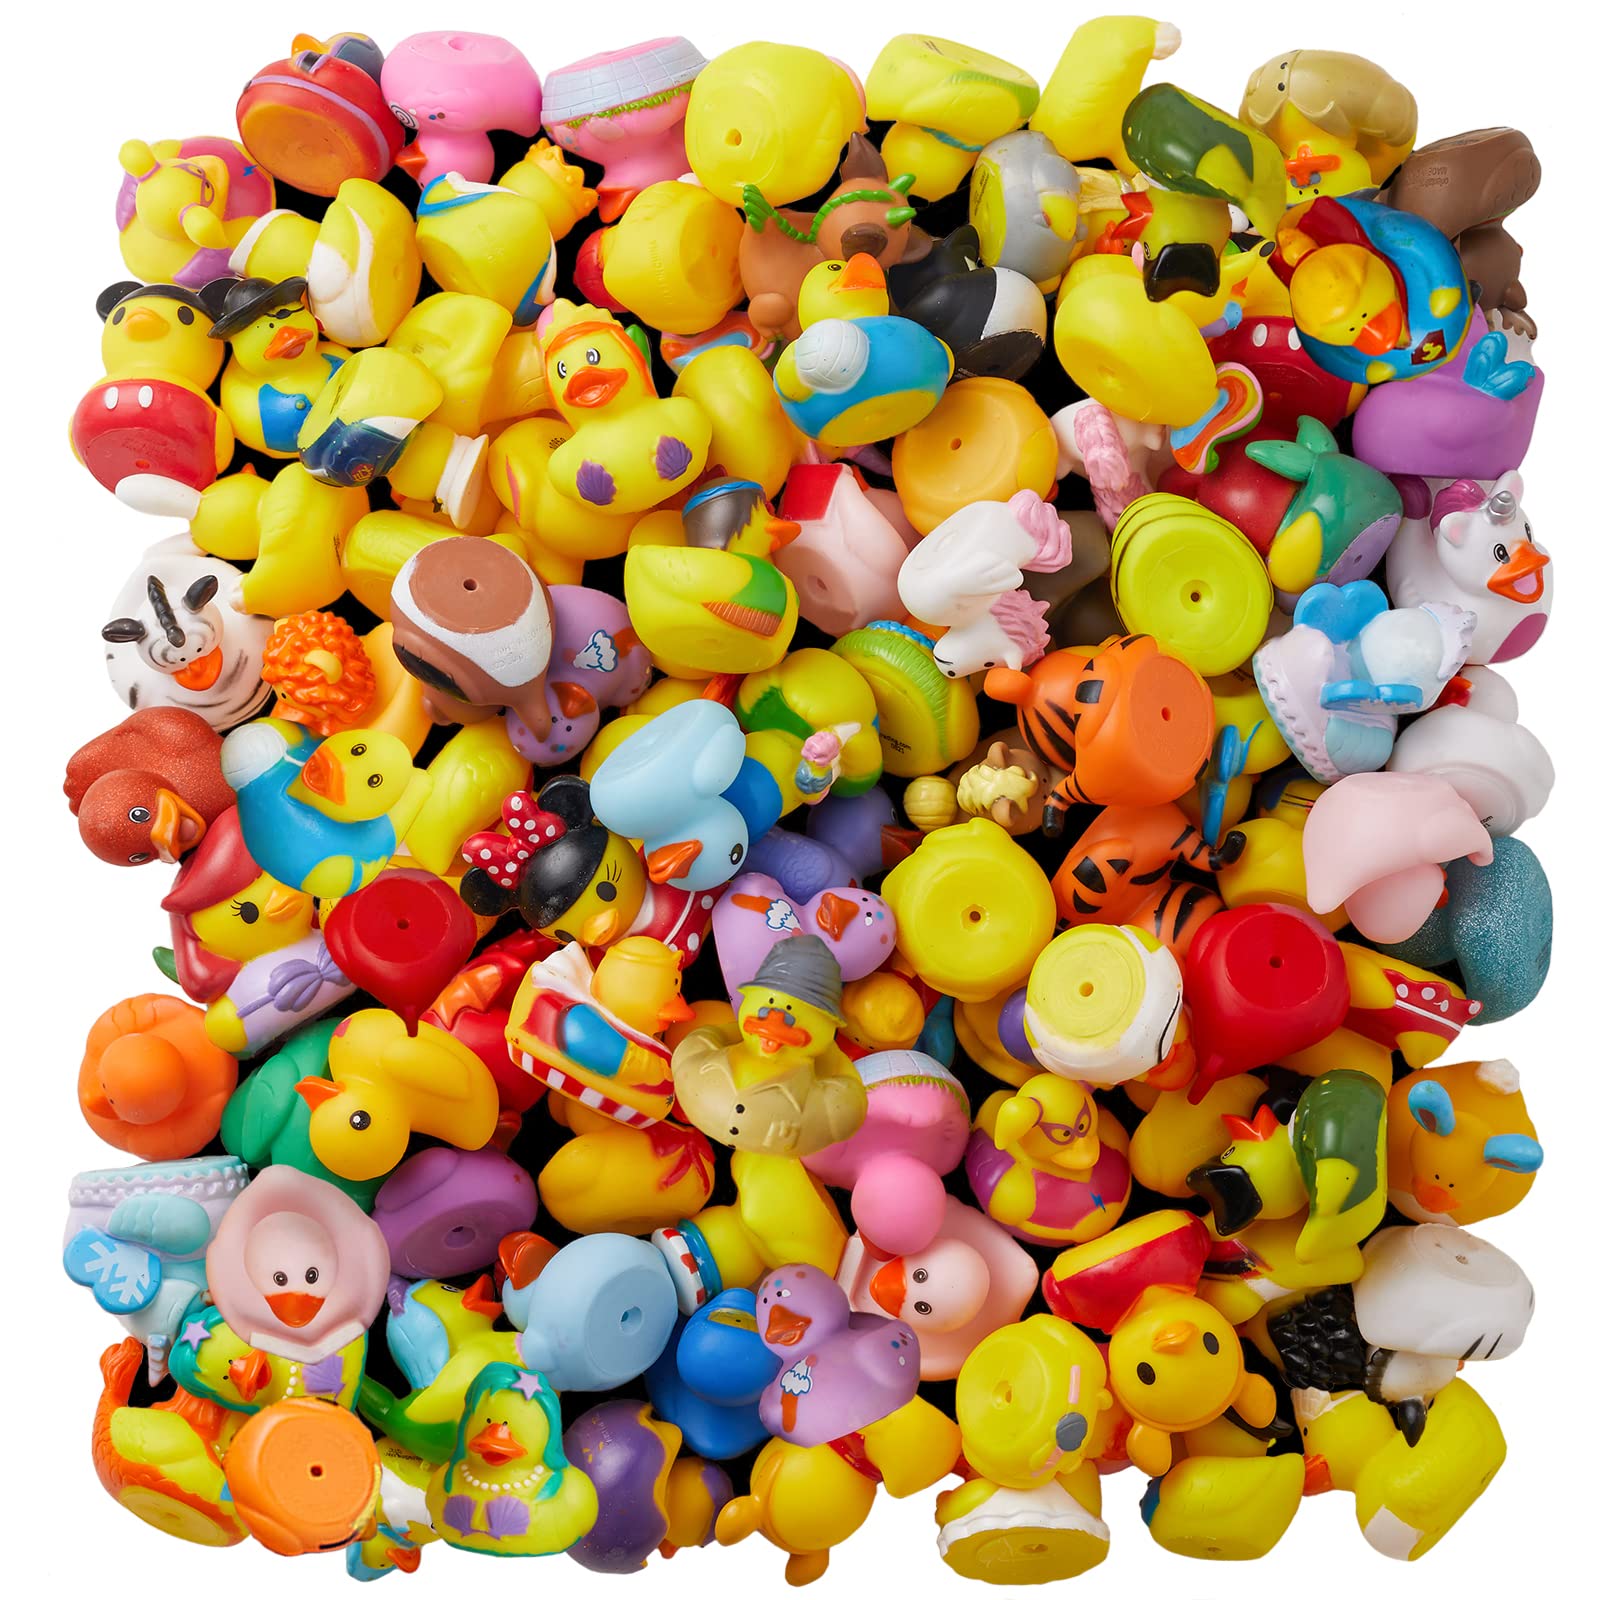 ValenLyra 100 Pack Rubber Duck for Jeeps Ducking - 2